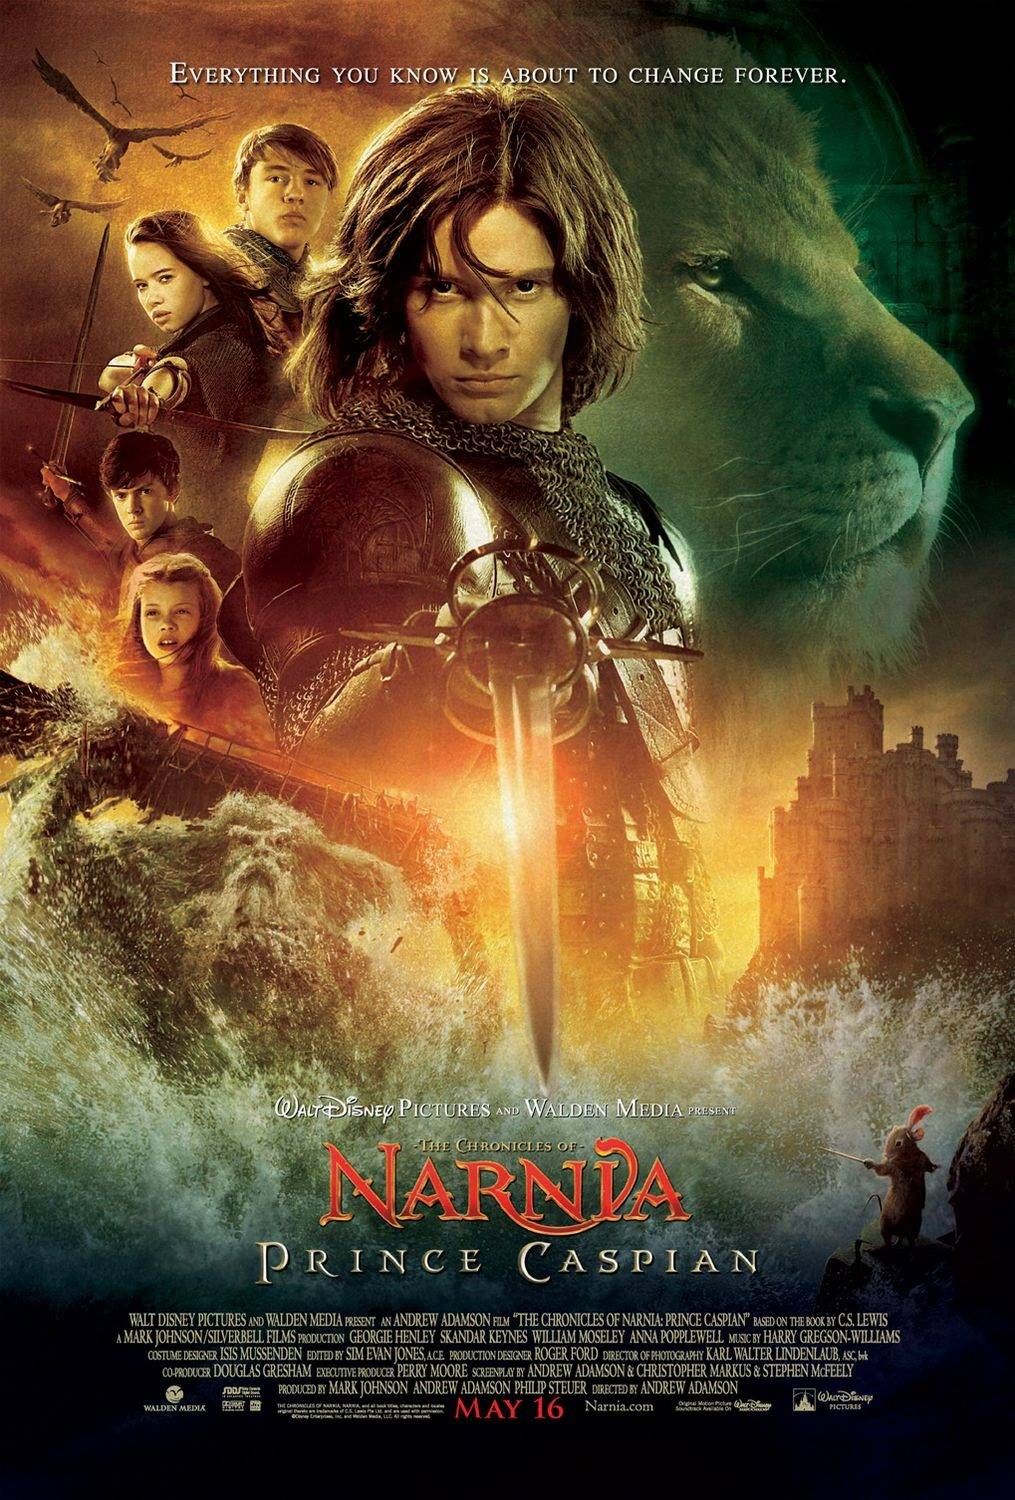 The Chronicles of Narnia Prince Caspian (2008) Hindi Dubbed Movie download full movie